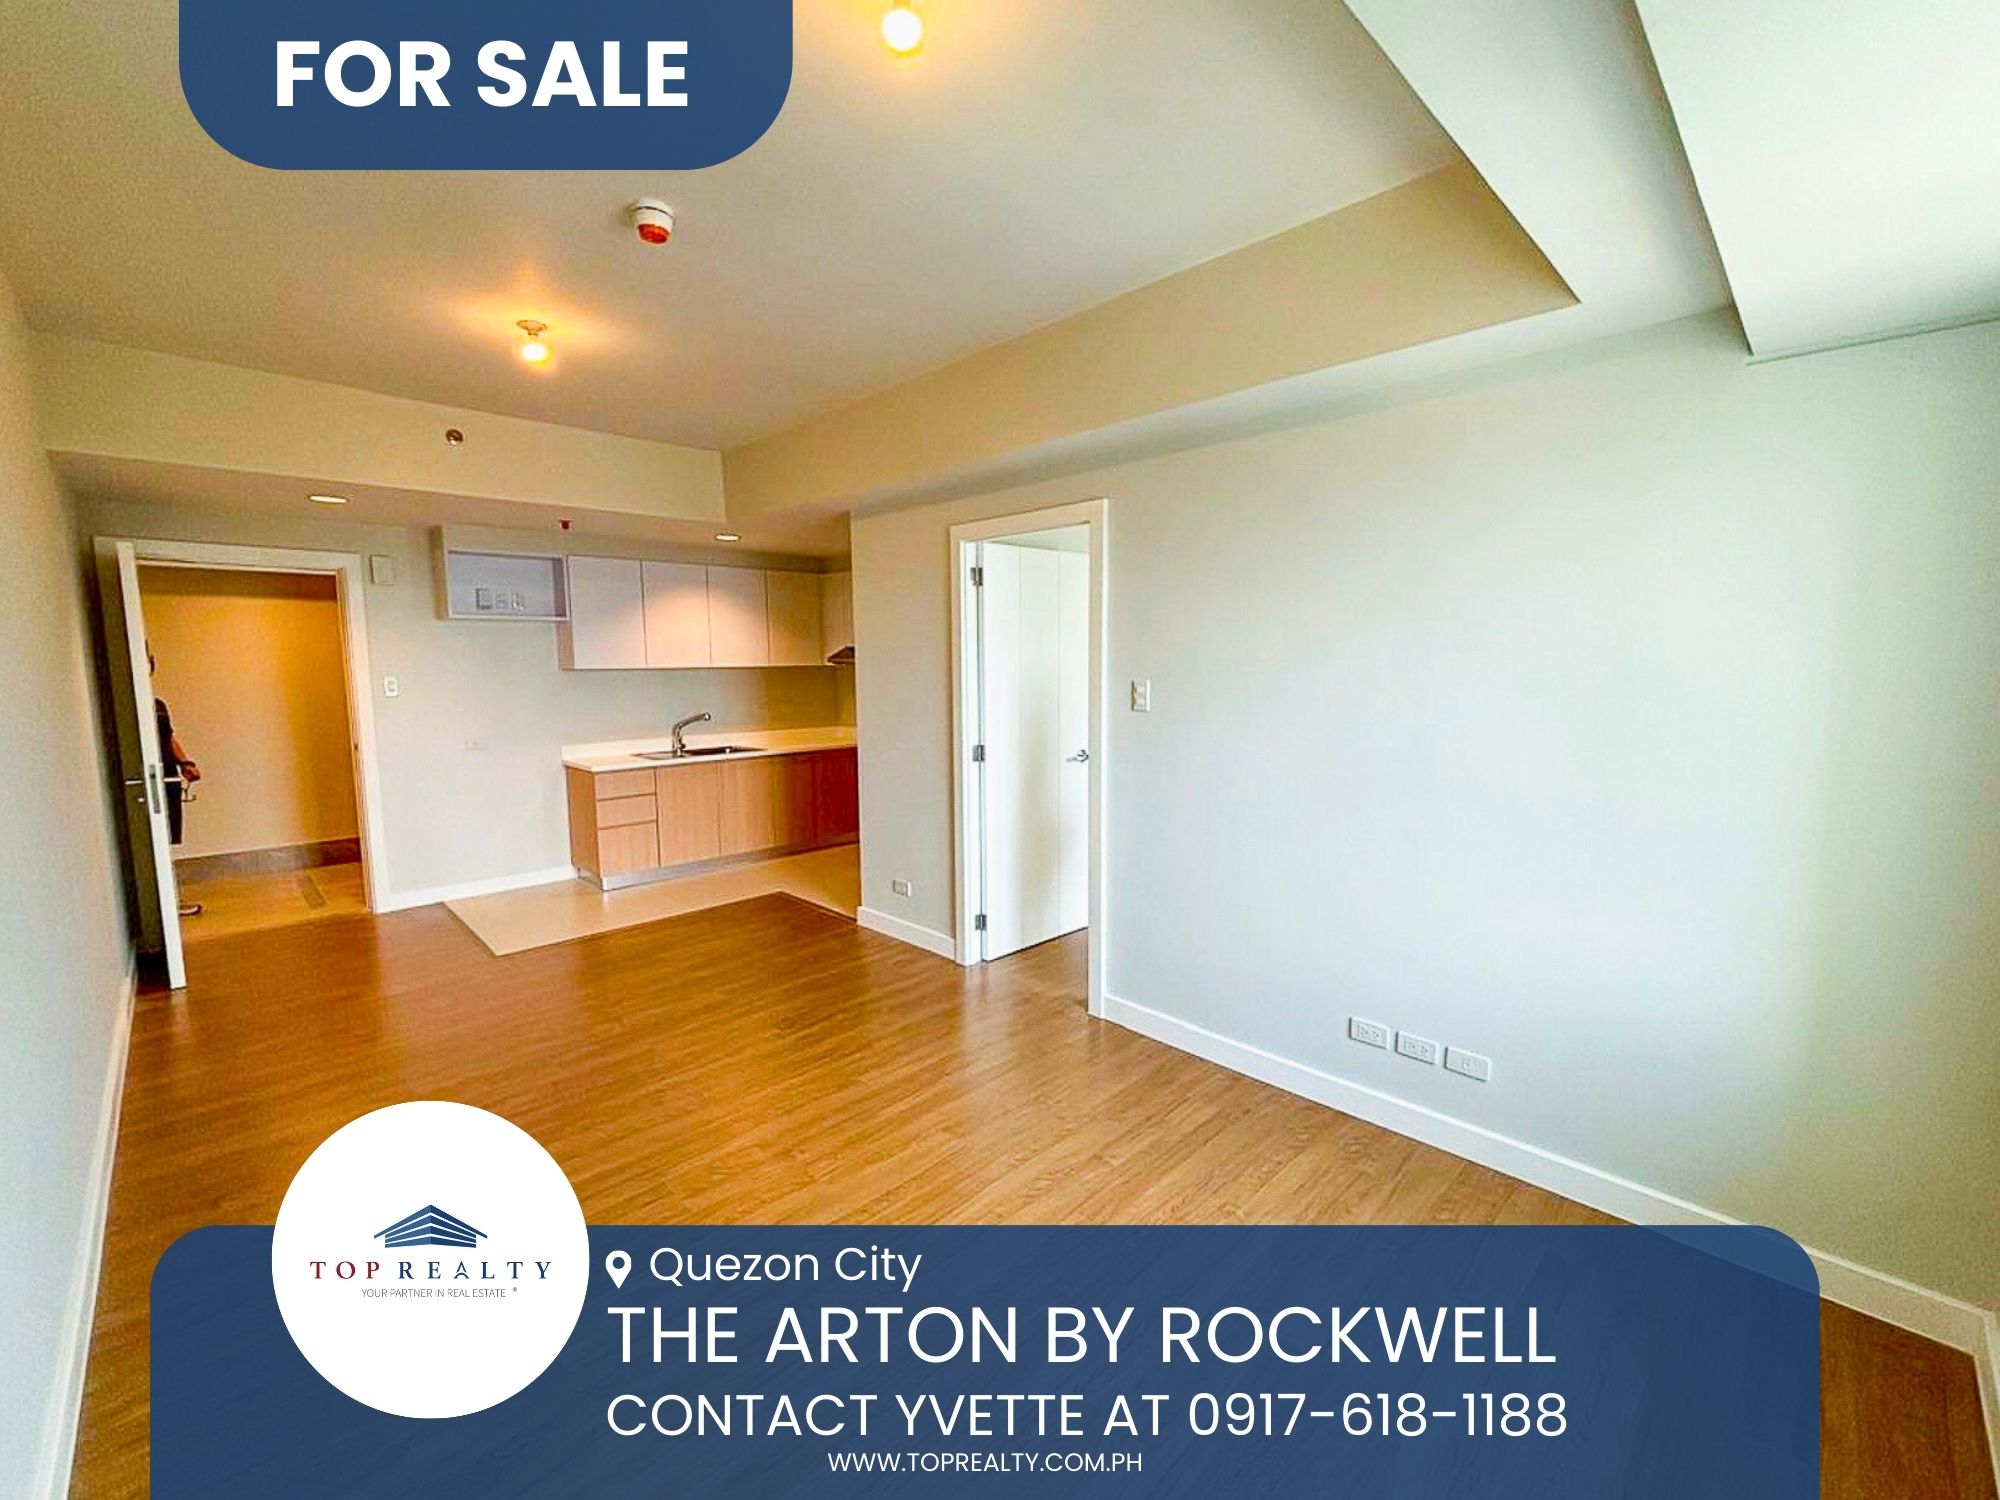 For Sale: Condo Unit in The Arton by Rockwell, Quezon City Lowest Price in the Market